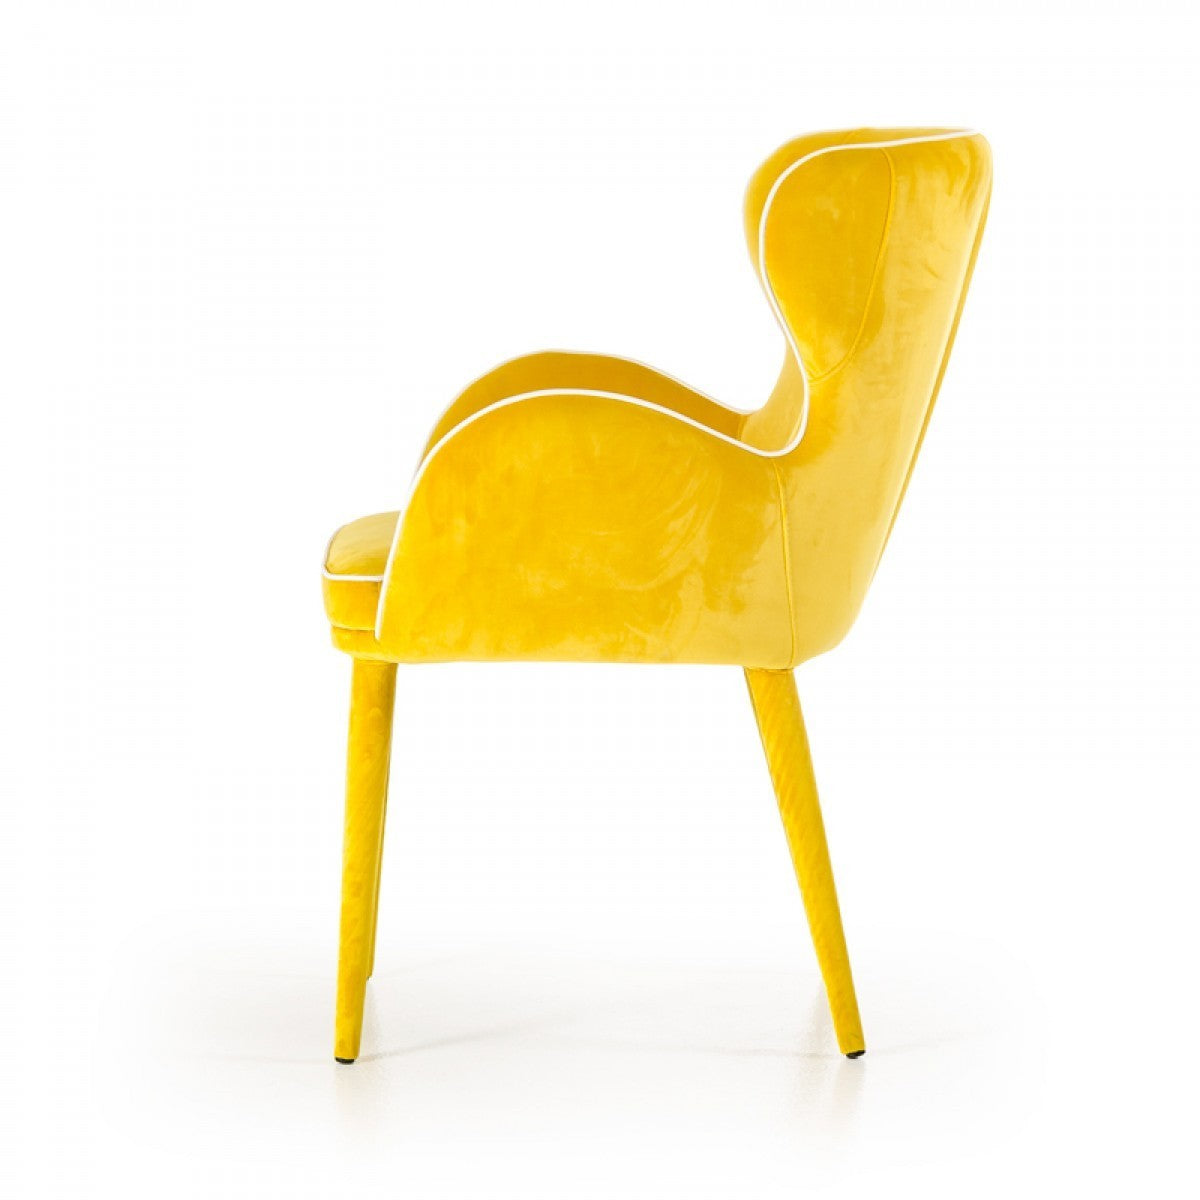 Modrest Tigard Yellow Fabric Dining Chair